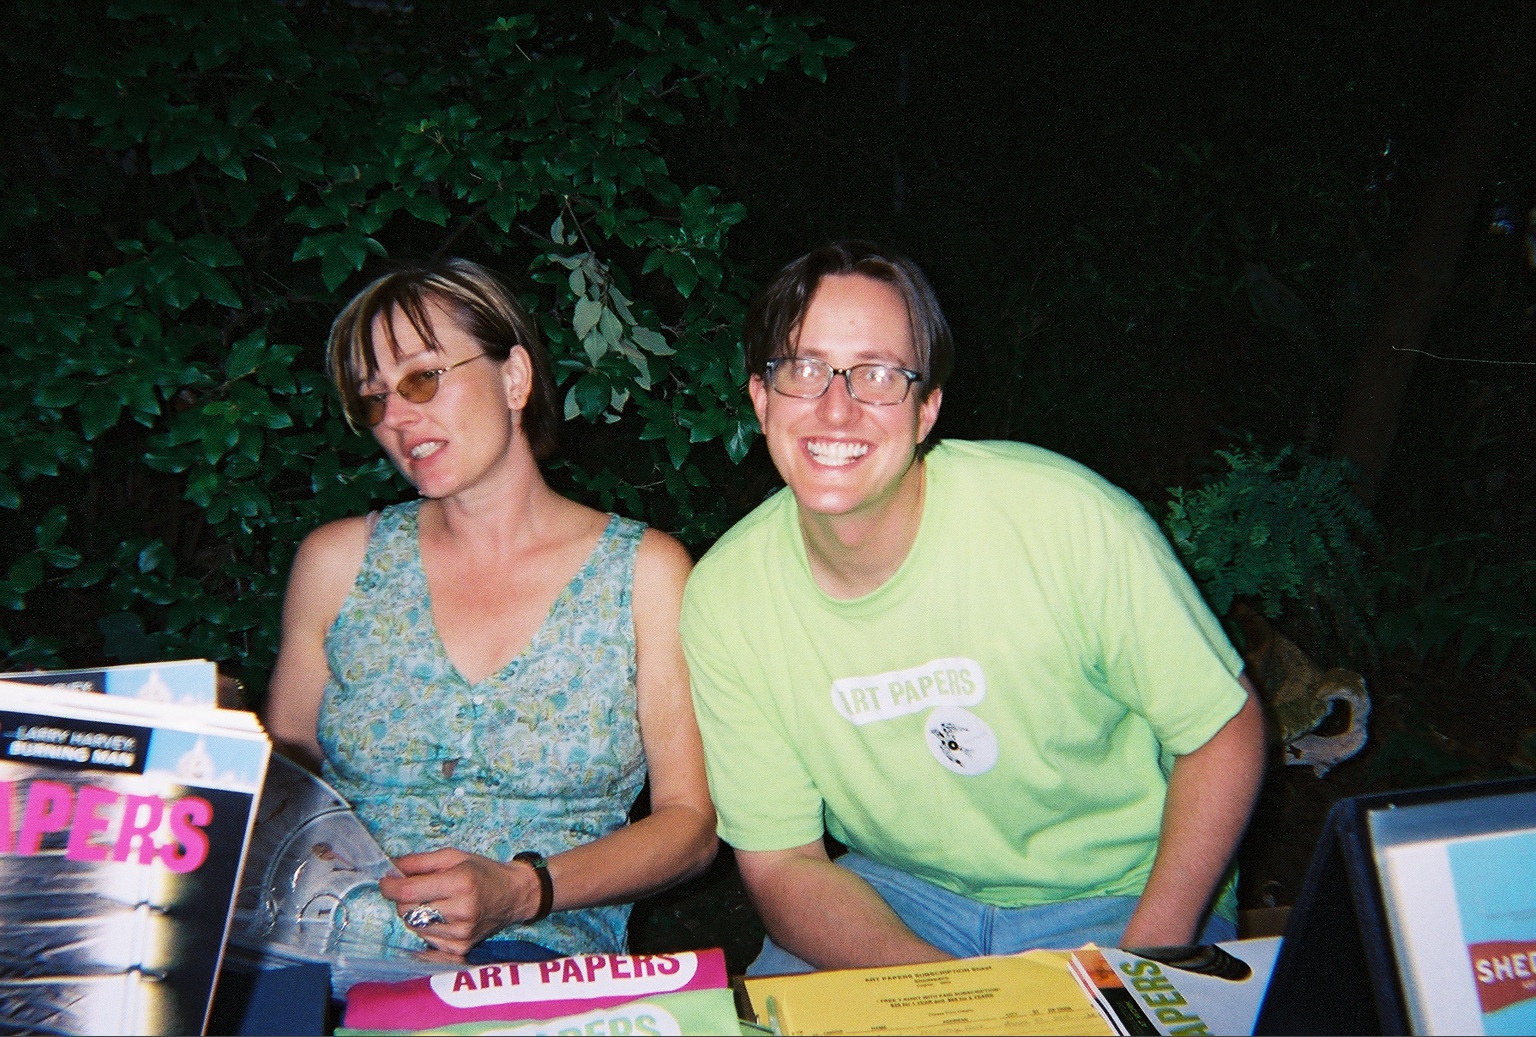 An image of two individuals smiling and surrounded by Art Papers issues and T-shirts. Dark leaves are in the background.